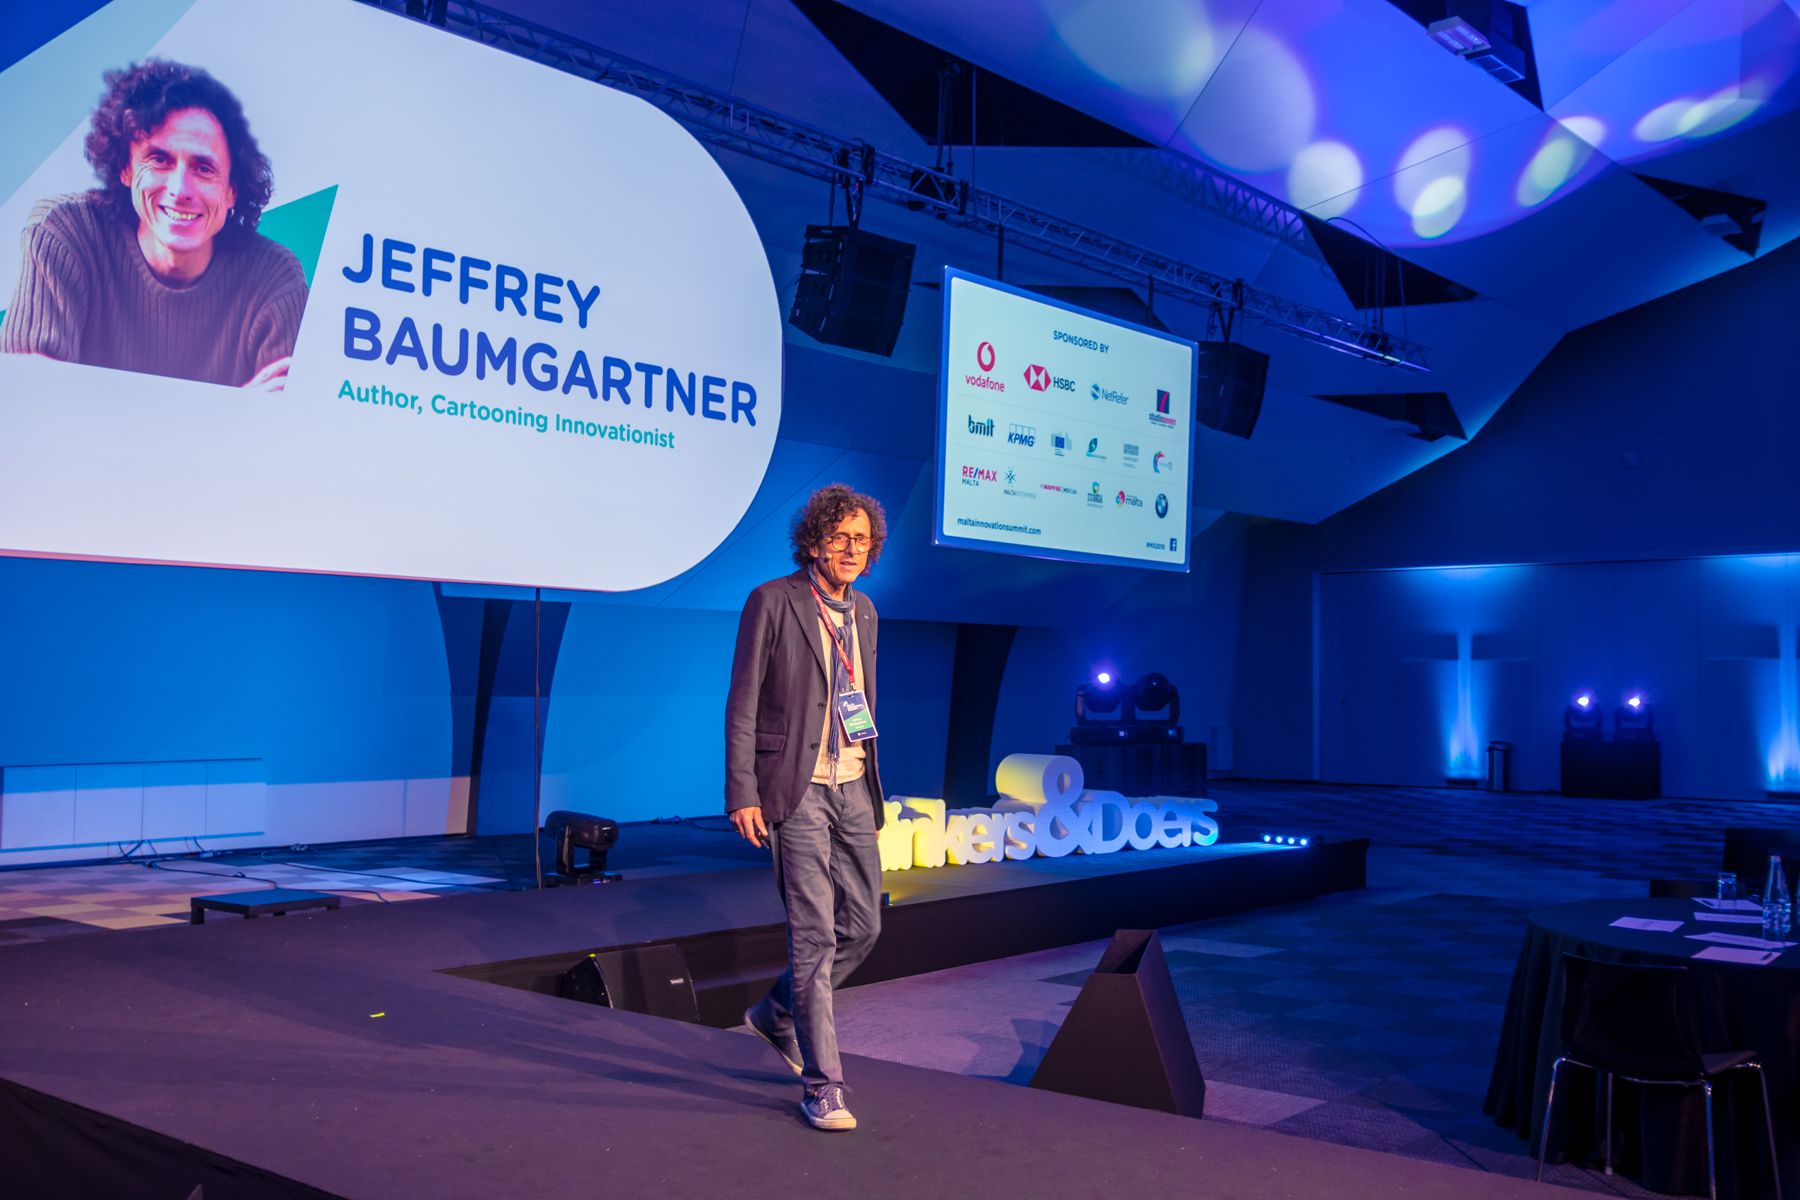 Jeffrey speaking at innovation conference in Malta